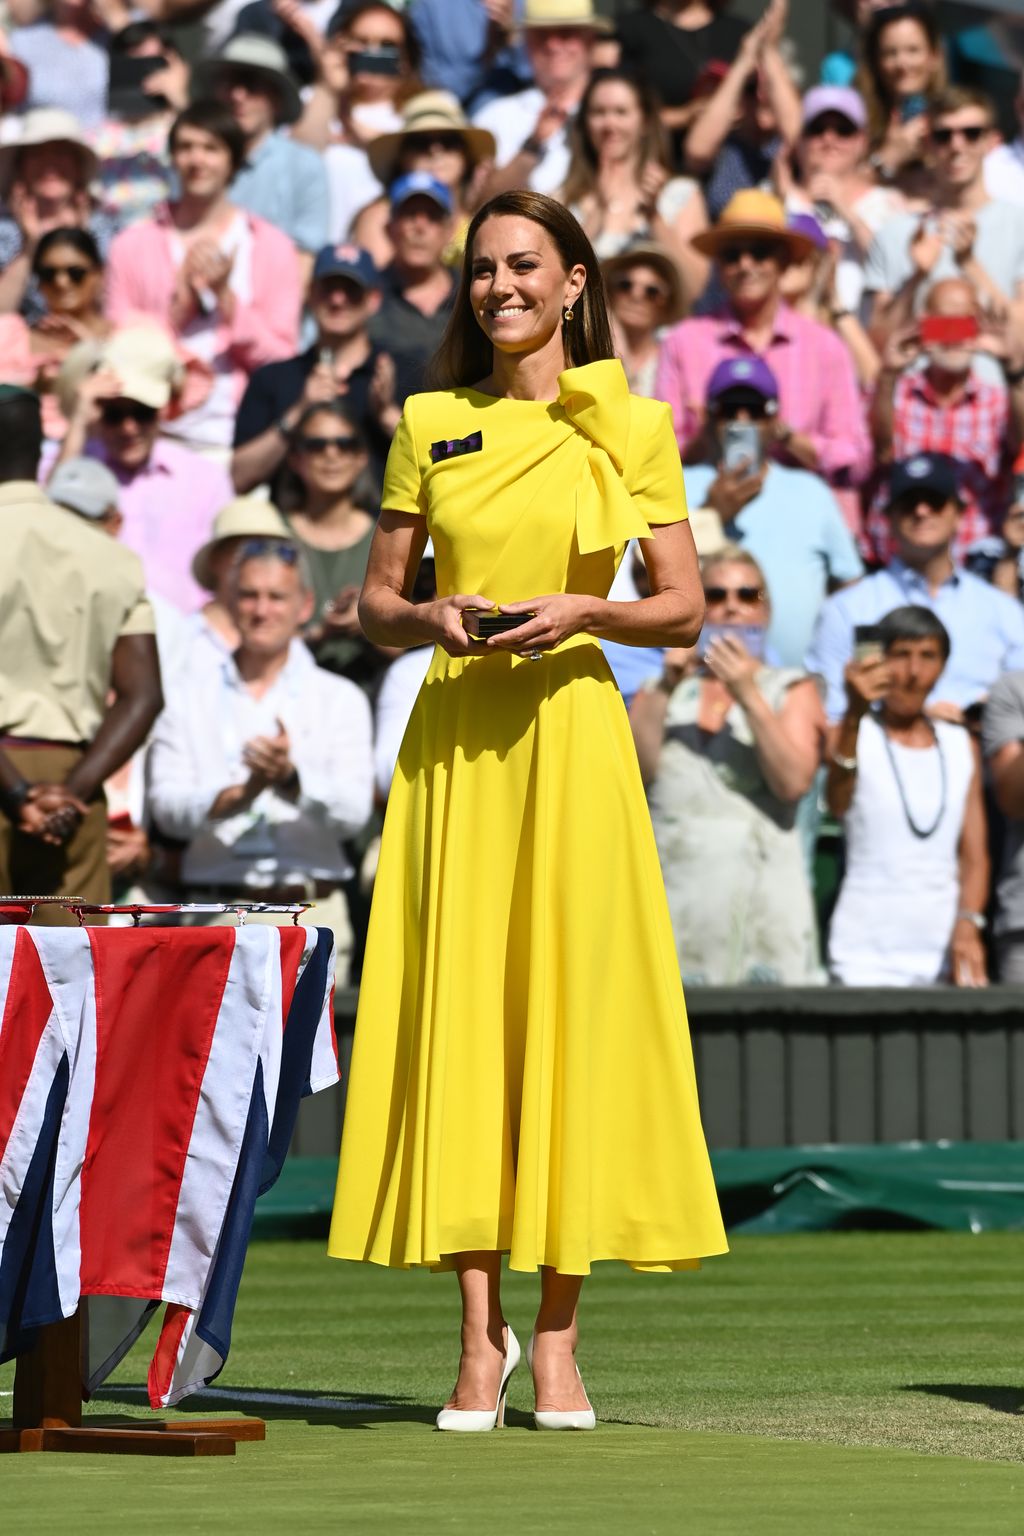 LONDON, ENGLAND - JULY 09: HRH Catherine, The Duchess of Cambridge walks out to present the trophy to Elena Rybakina of Kazakhstan after victory against Ons Jabeur of Tunisia during the Ladies' Singles Final match on day thirteen of The Championships Wimbledon 2022 at All England Lawn Tennis and Croquet Club on July 09, 2022 in London, England. (Photo by Stringer/Anadolu Agency via Getty Images)